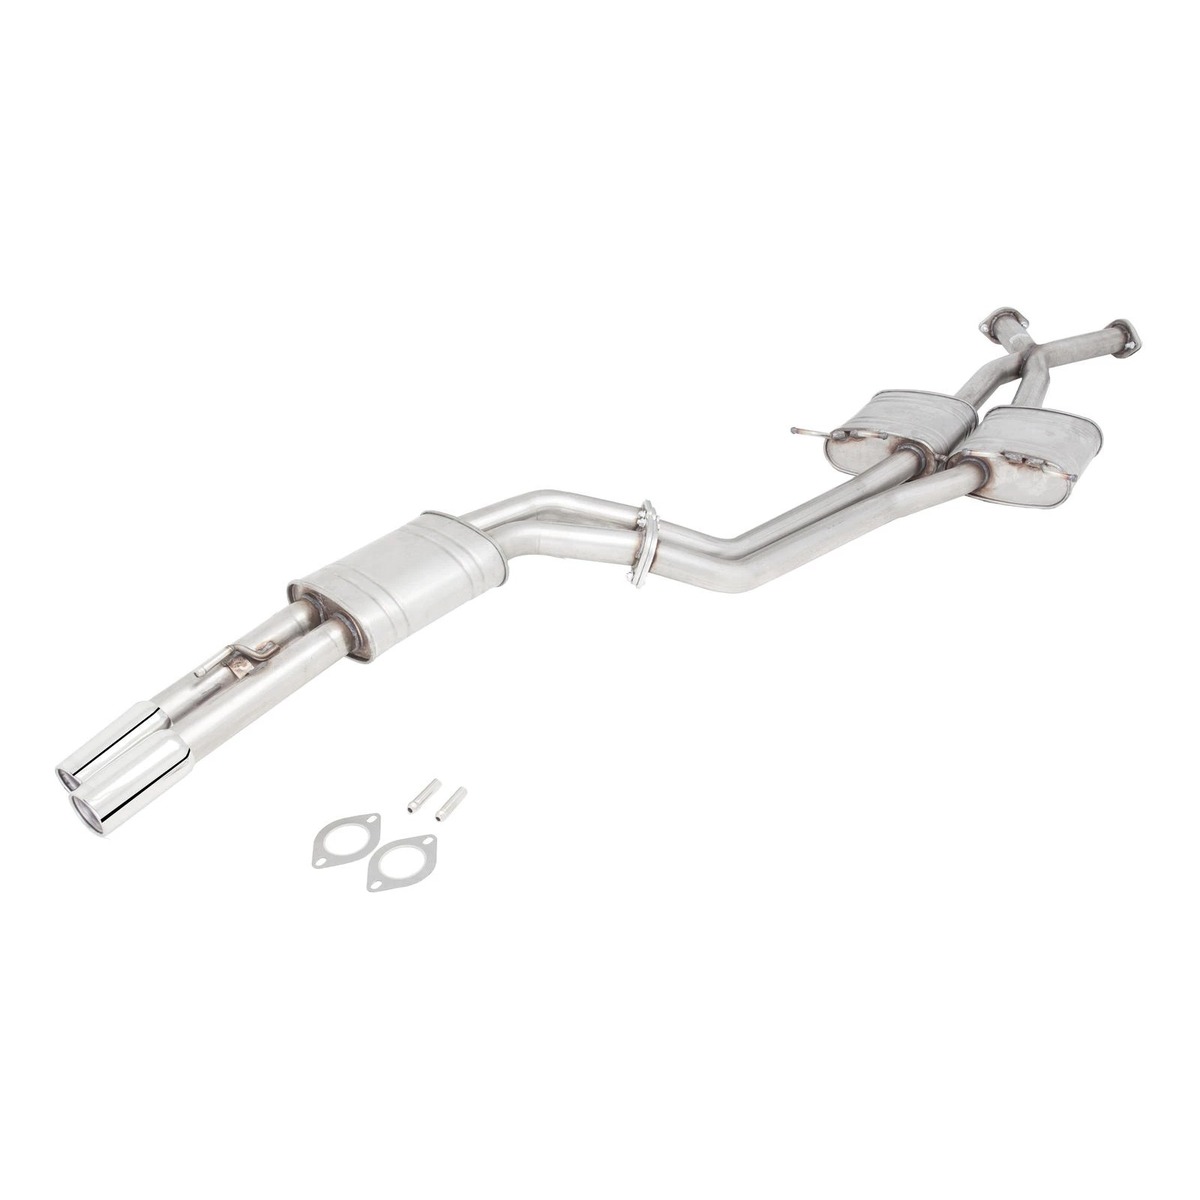 E4-HV24-CBS XFORCE TWIN 2.5IN CAT-BACK EXHAUST SYSTEM SS